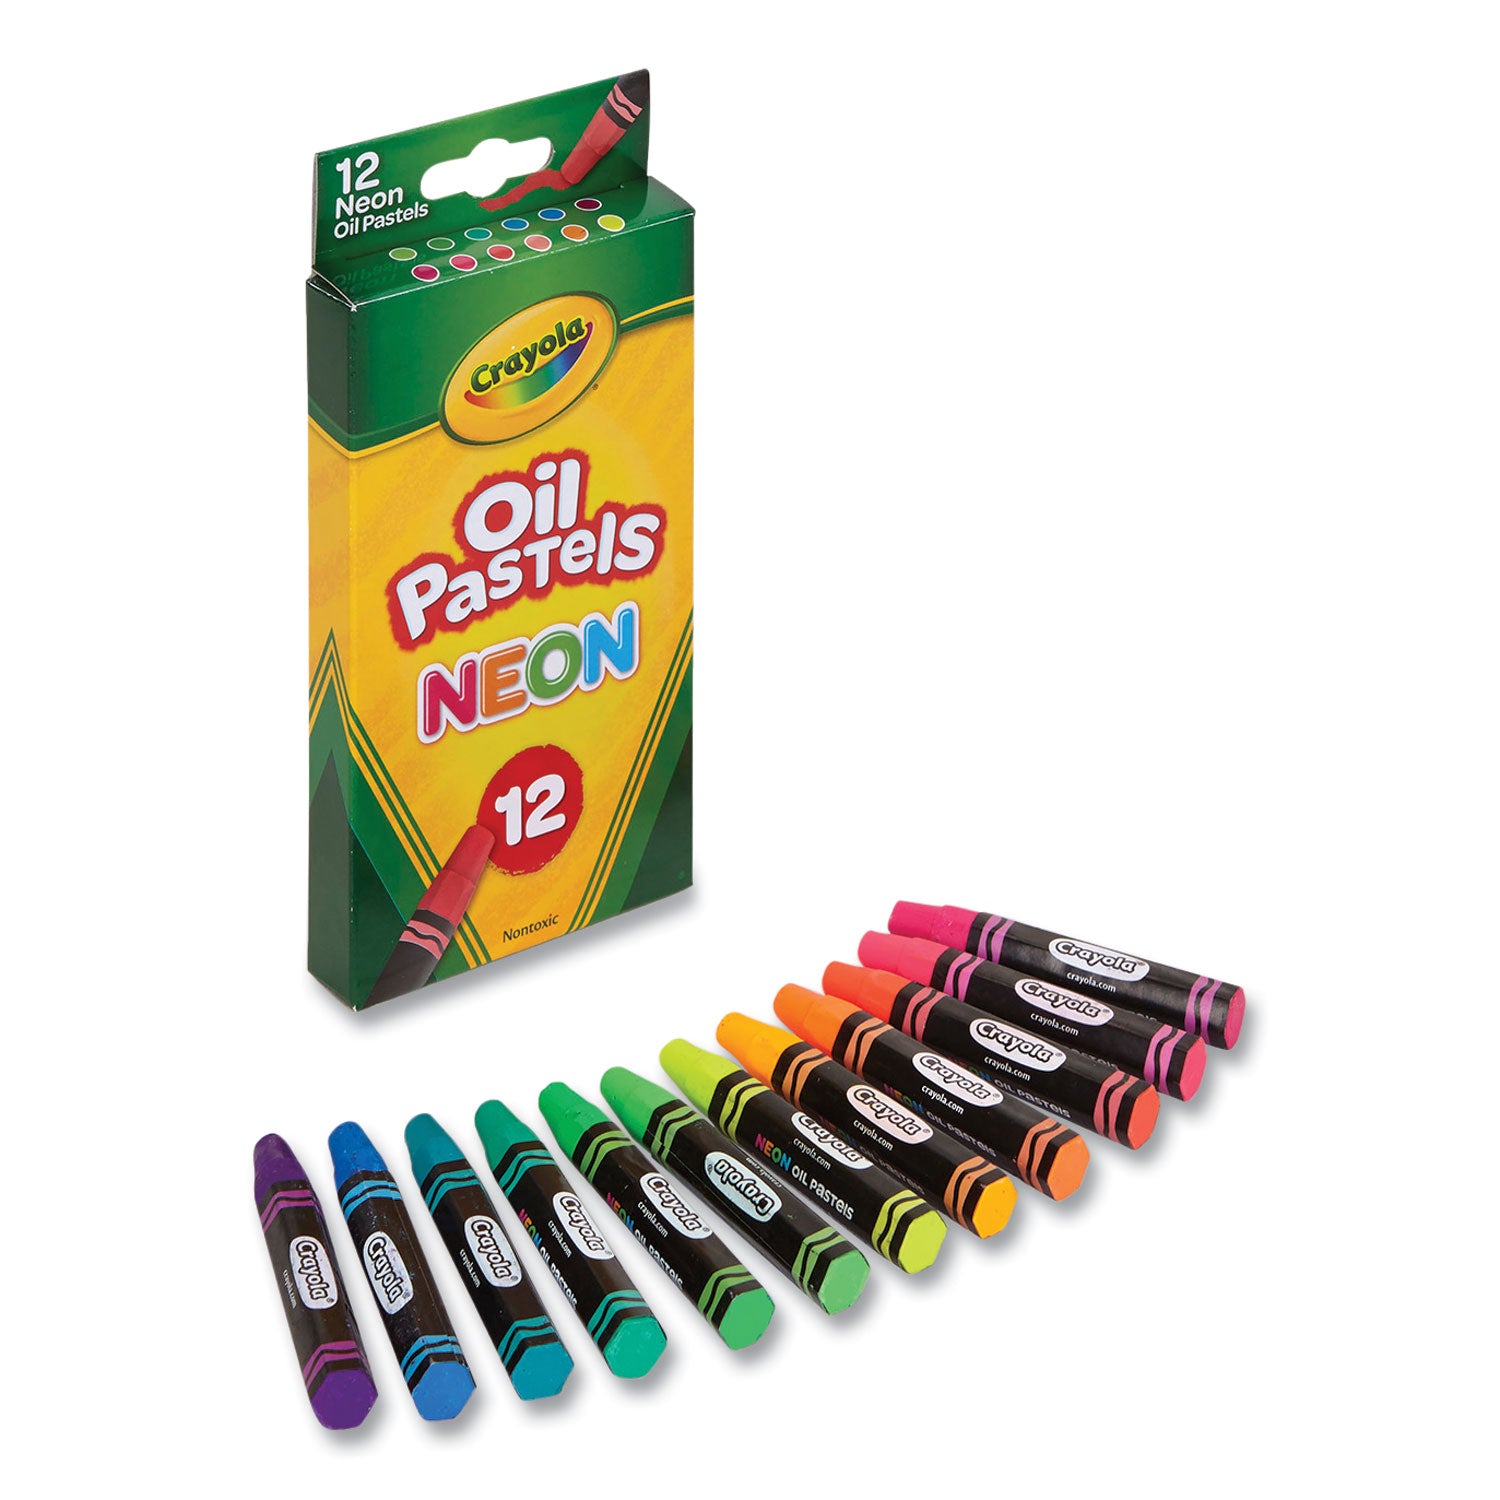 neon-oil-pastels-12-assorted-colors-12-pack_cyo524613 - 1